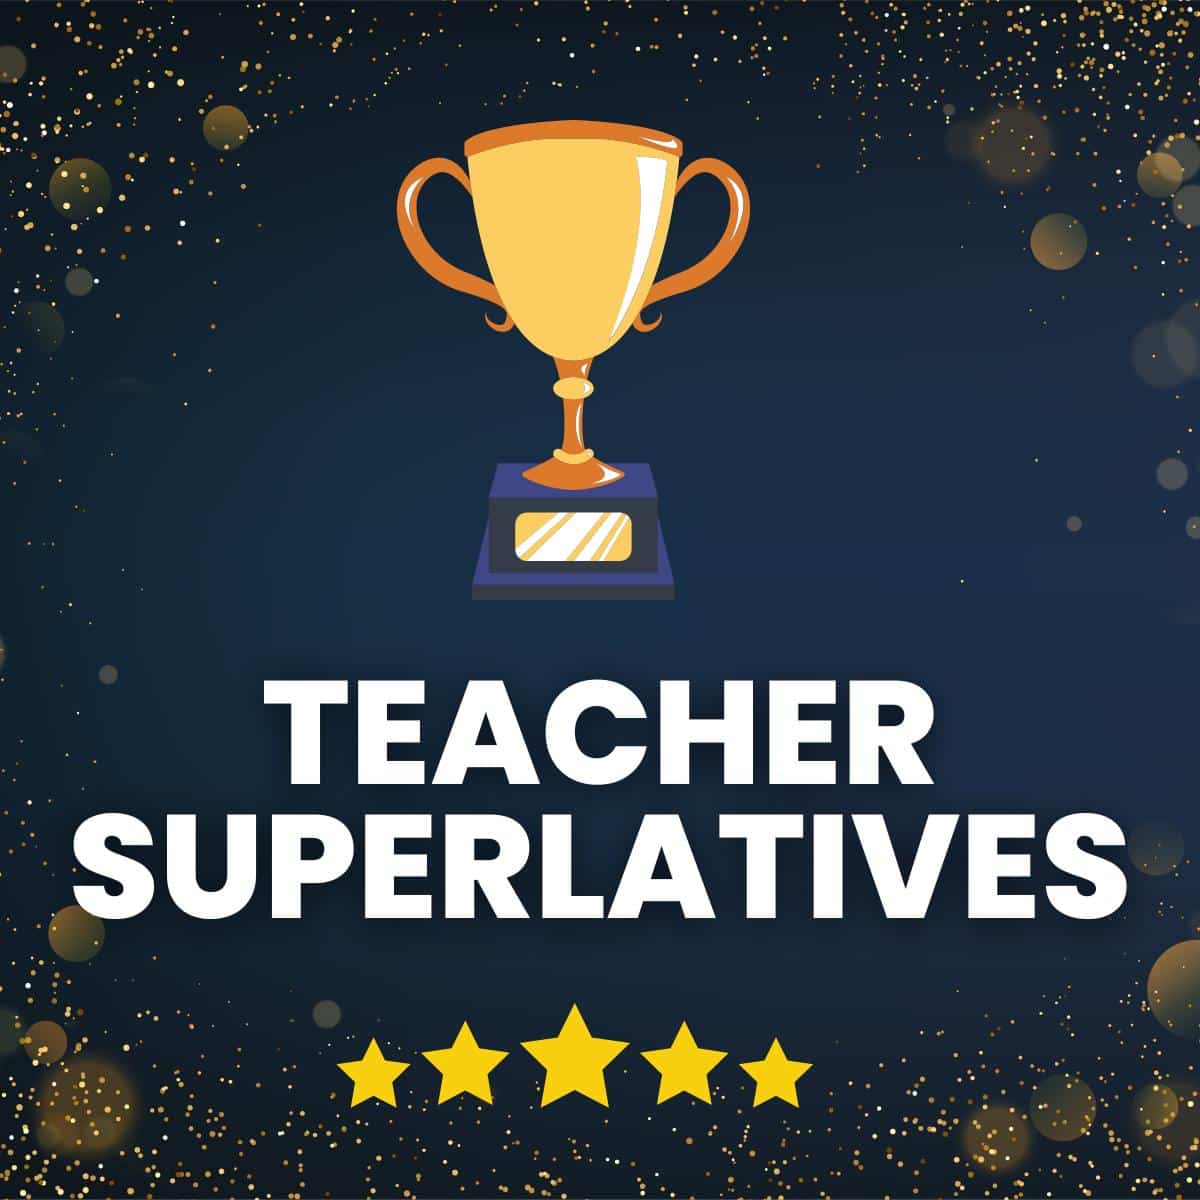 Drawing of Trophy with text "teacher superlatives" 